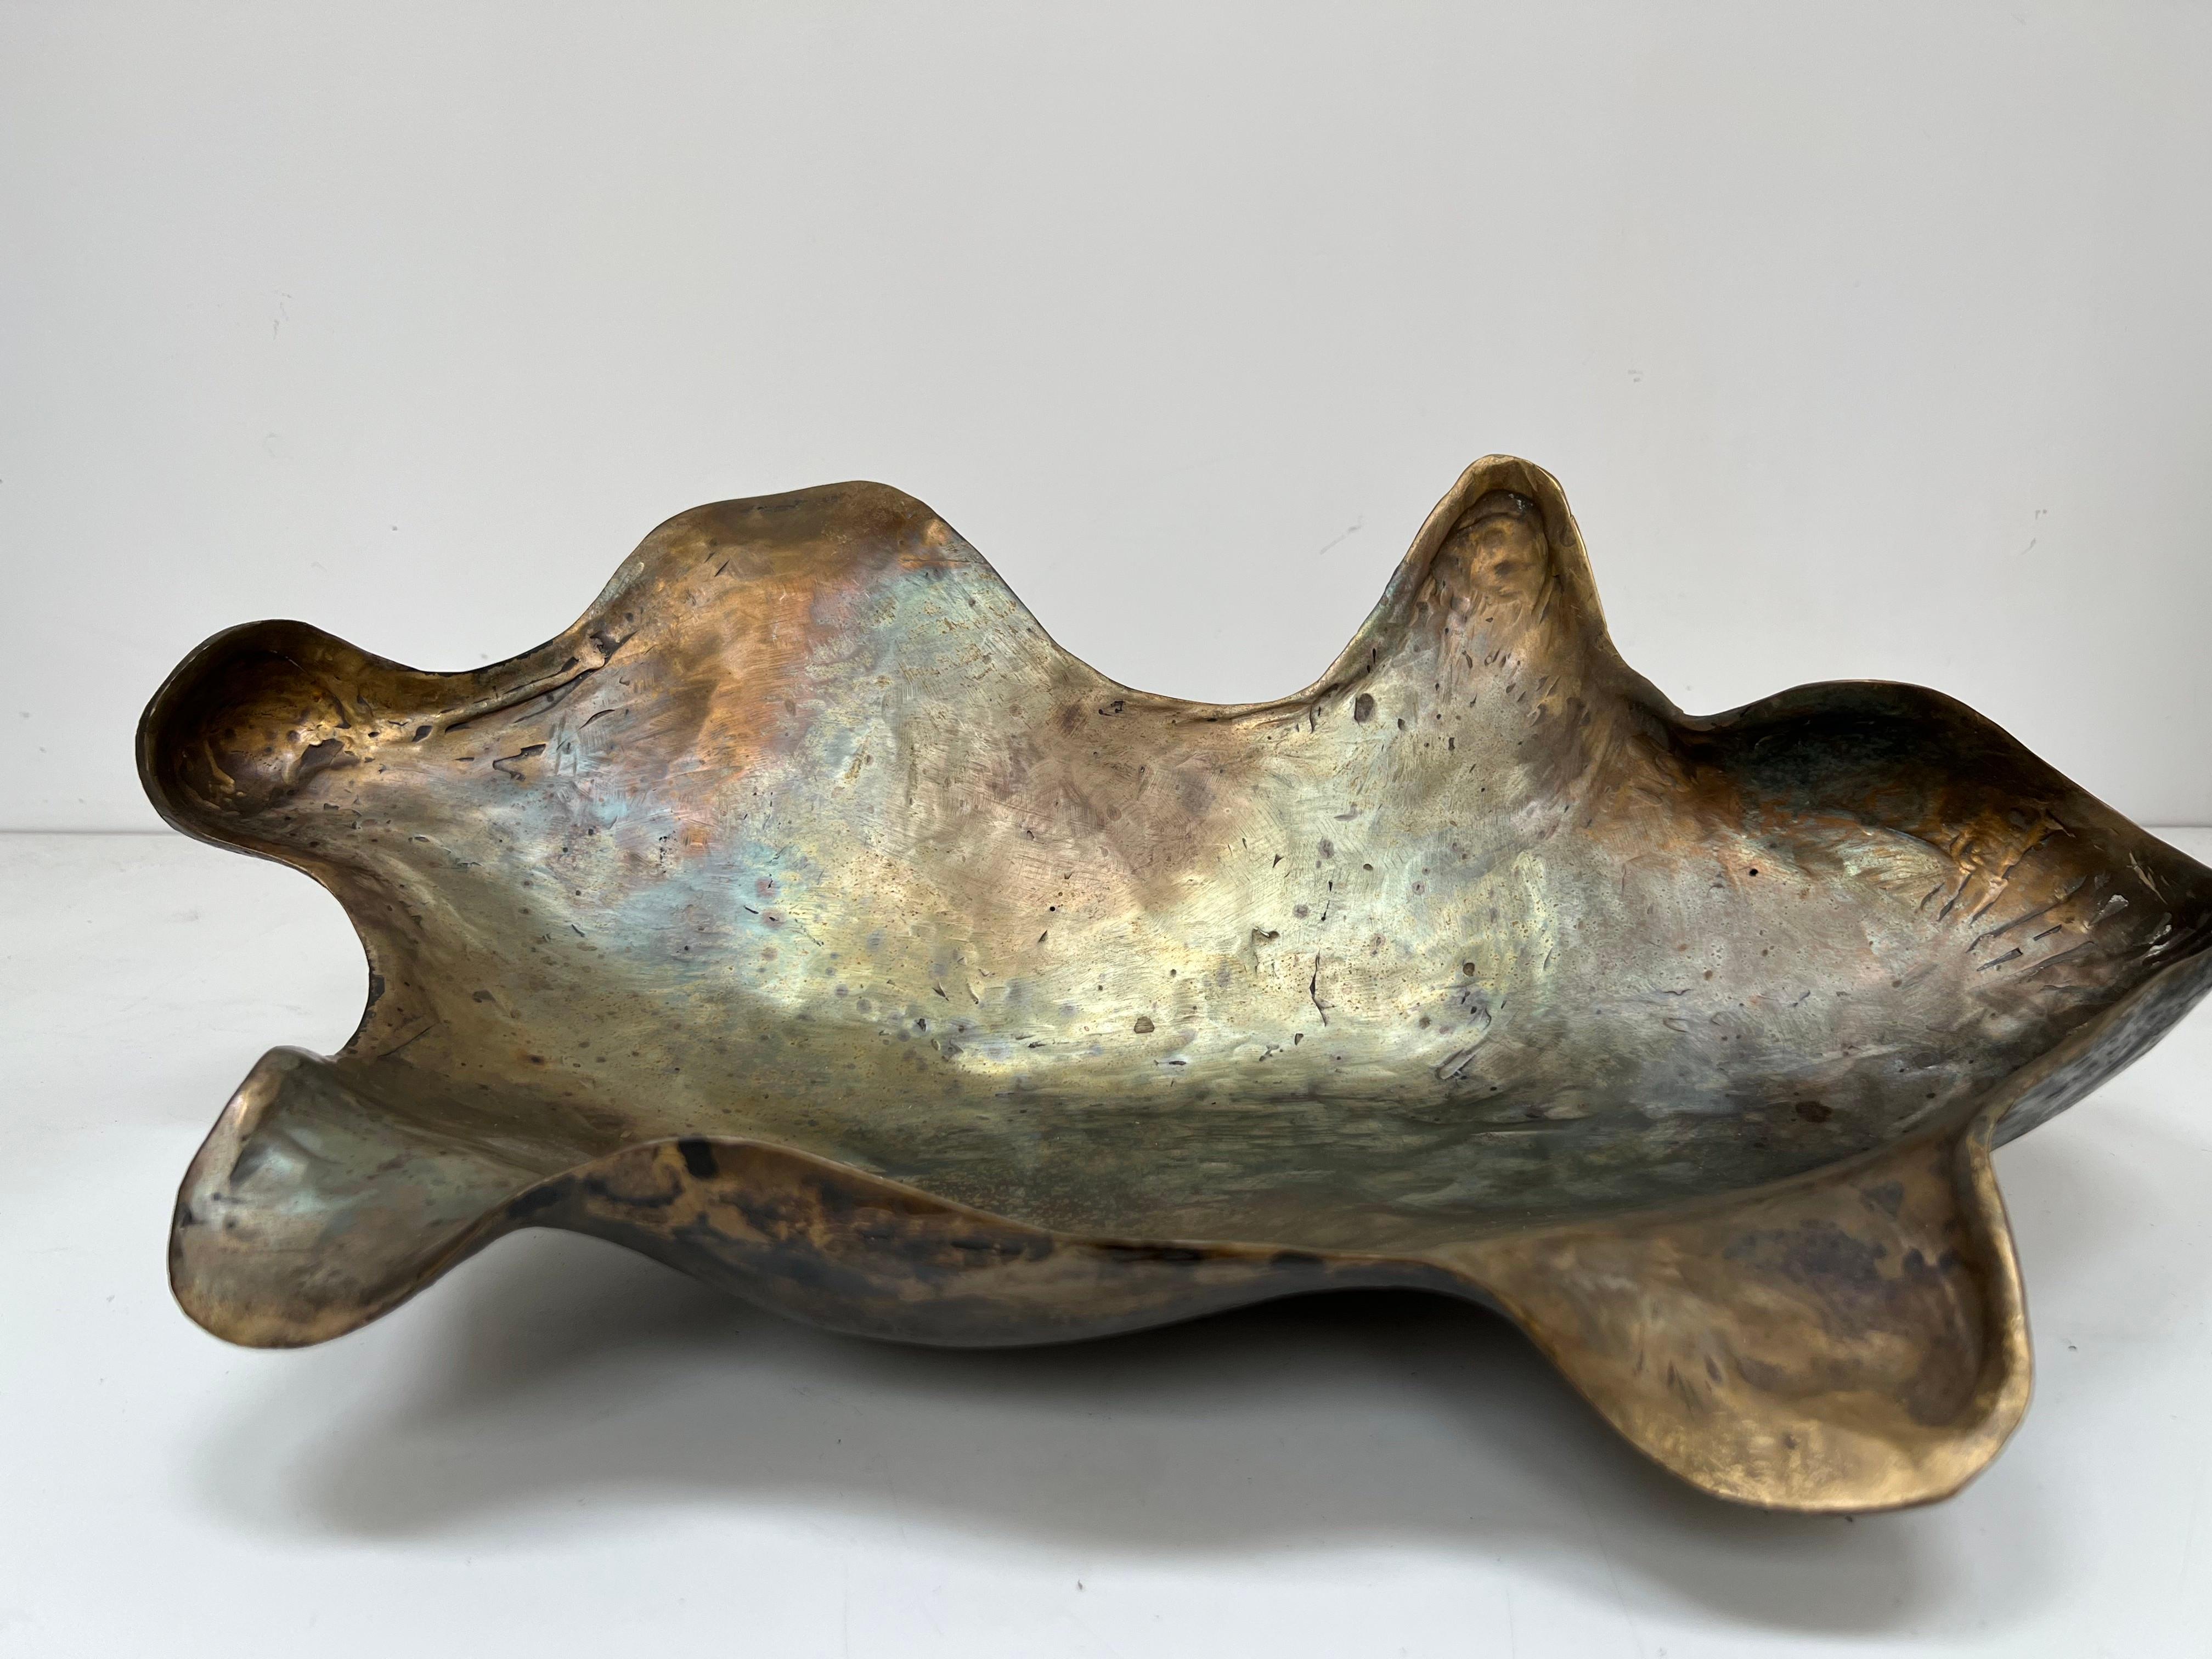 ’Tortolina 1’ - a decorative sculptural bowl, hand crafted, moulded and cast in bronze in the lost wax process. 
The object is intricately crafted leaving the artist delicately imprints marks on the surface, enhancing the object’s organic texture.